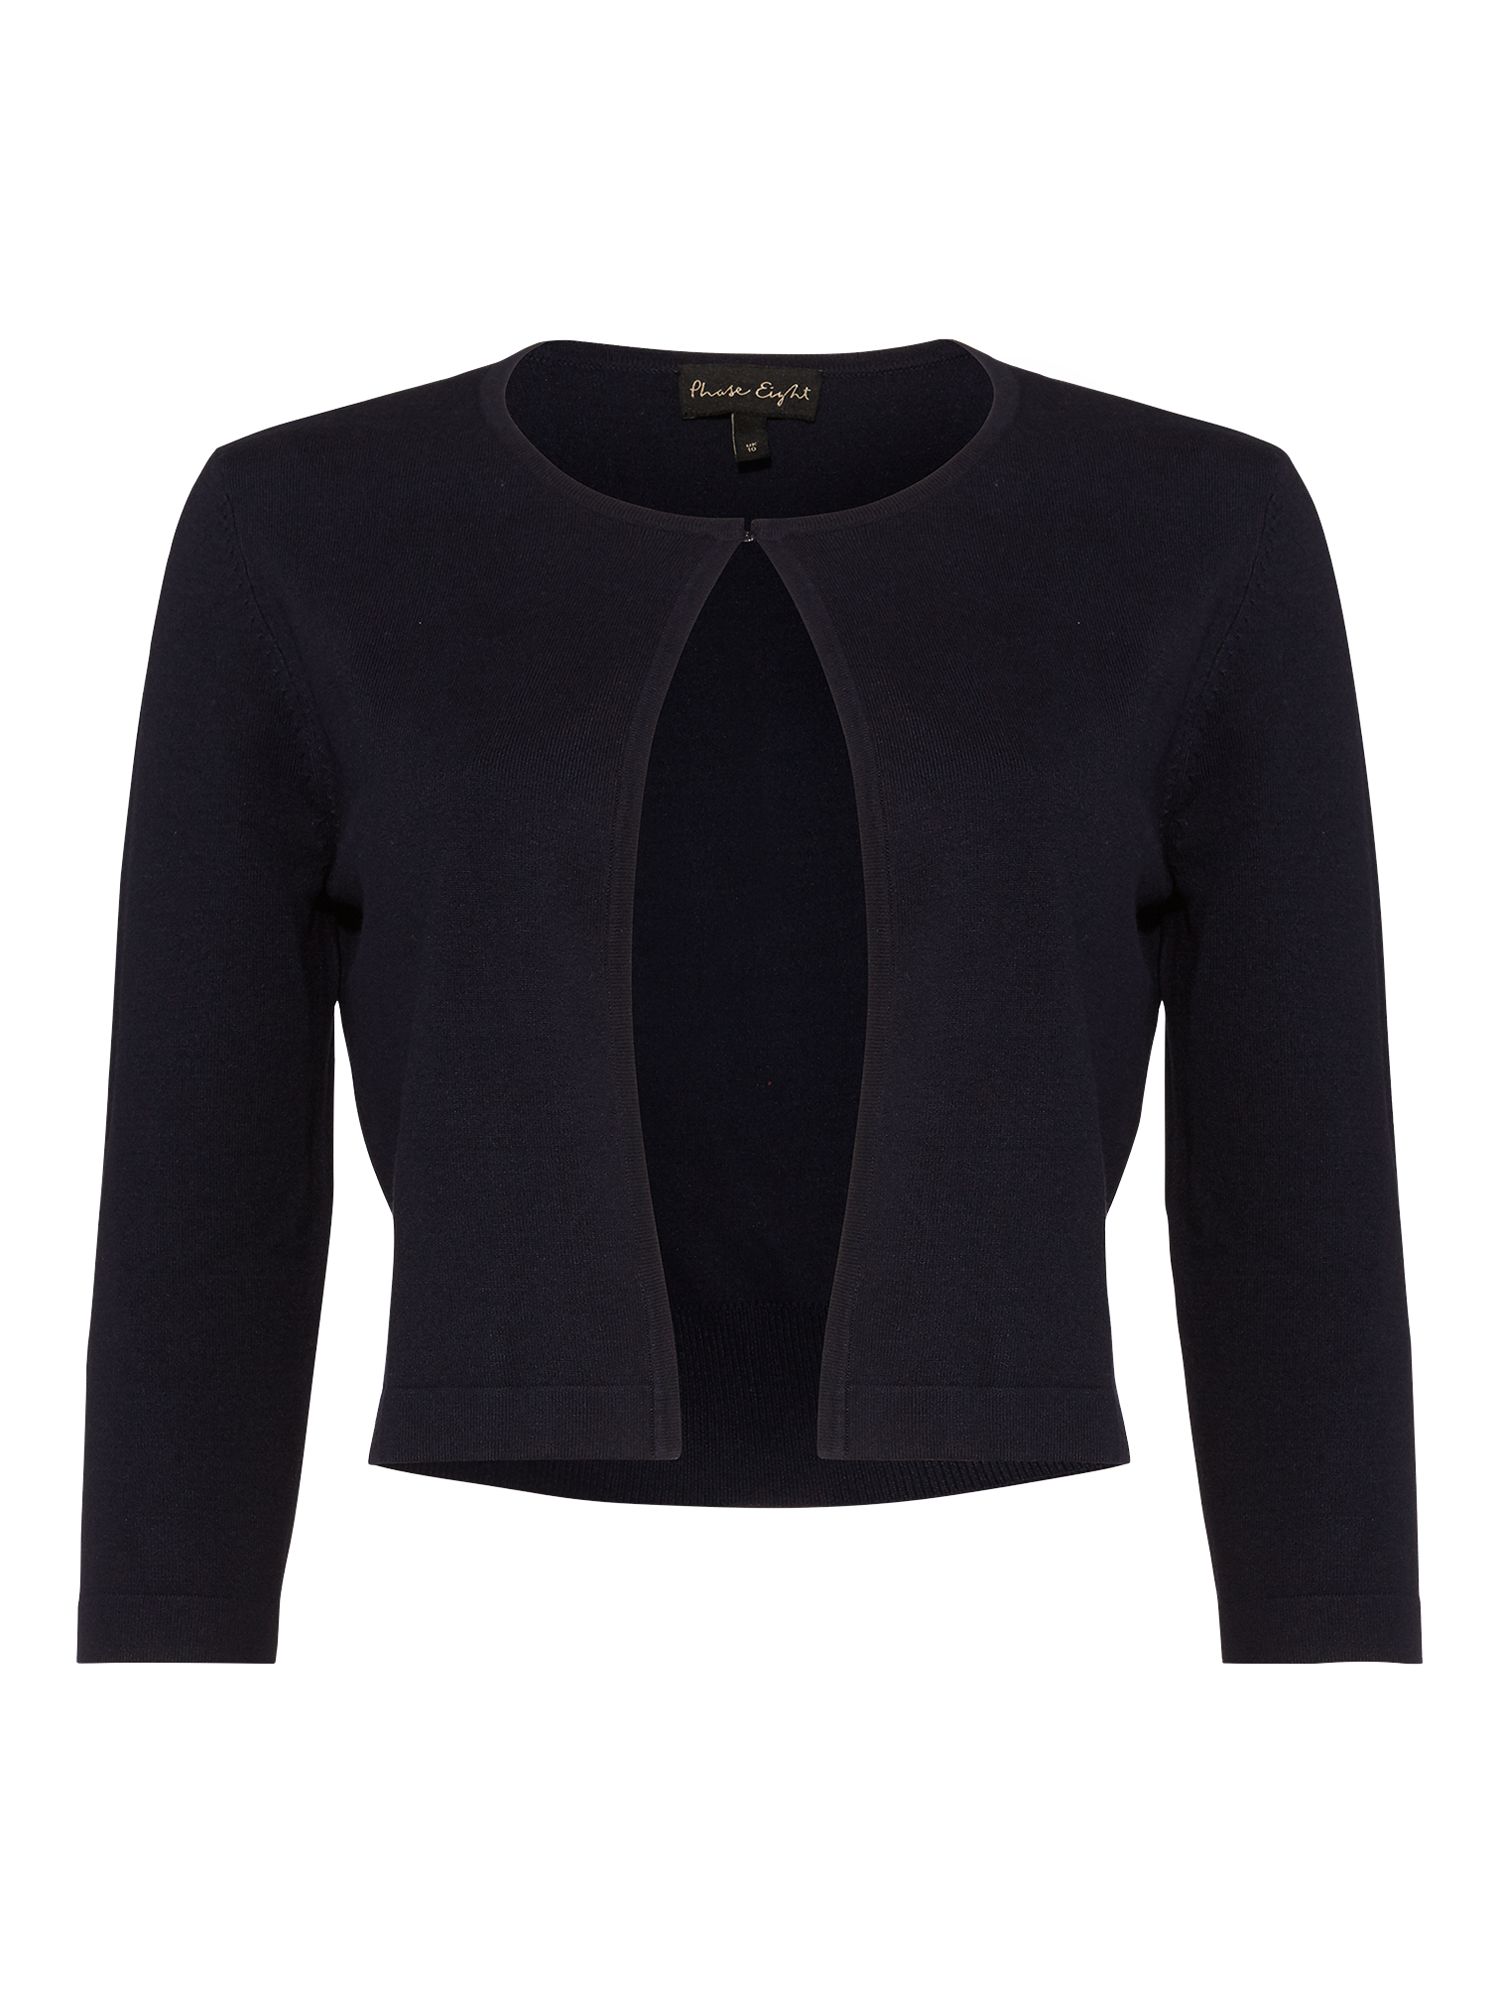 Buy Phase Eight Catie Cardigan Online at johnlewis.com